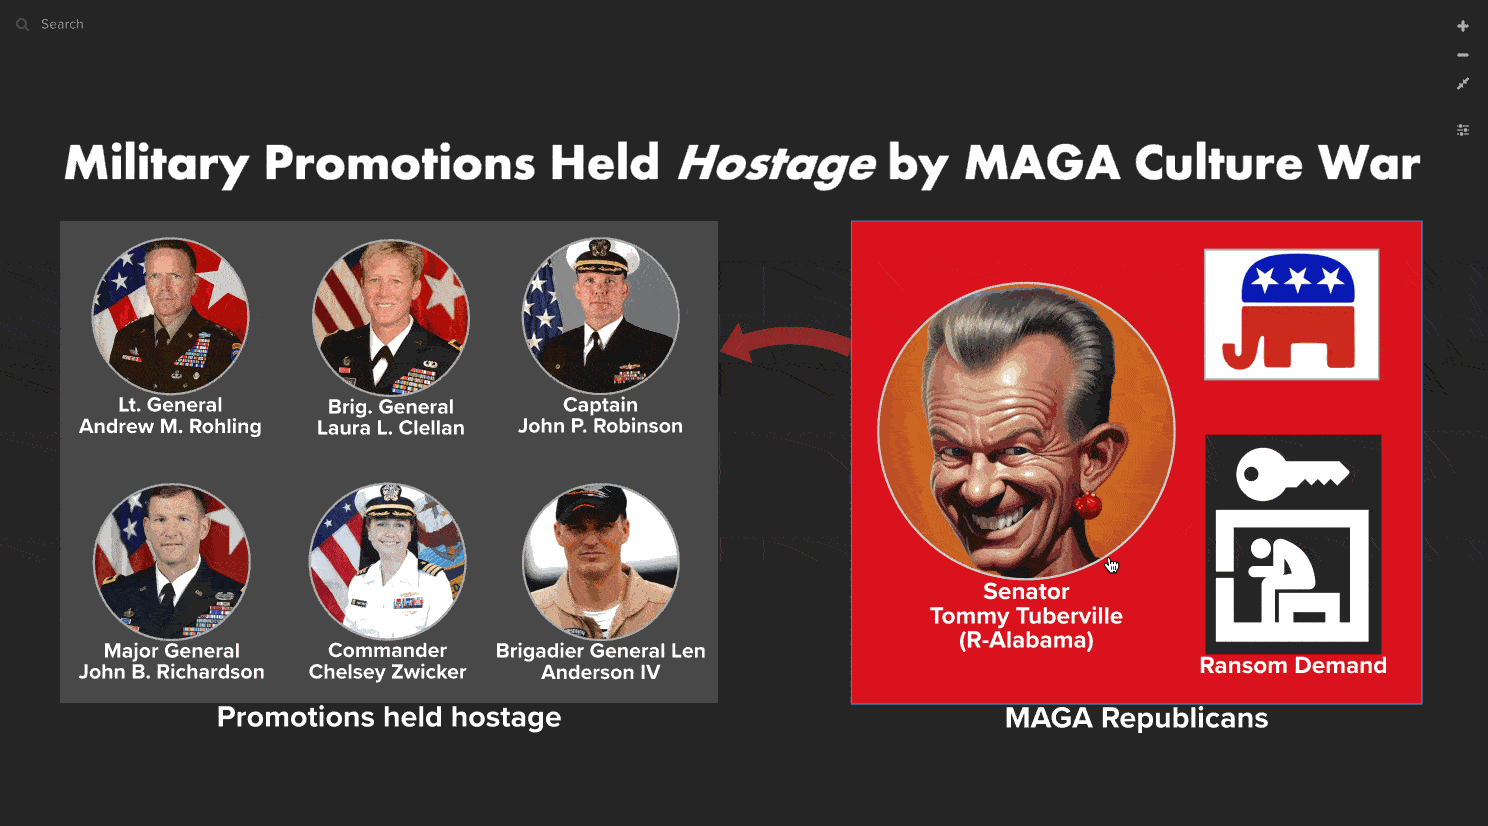 MAGA Republicans take military promotions hostage